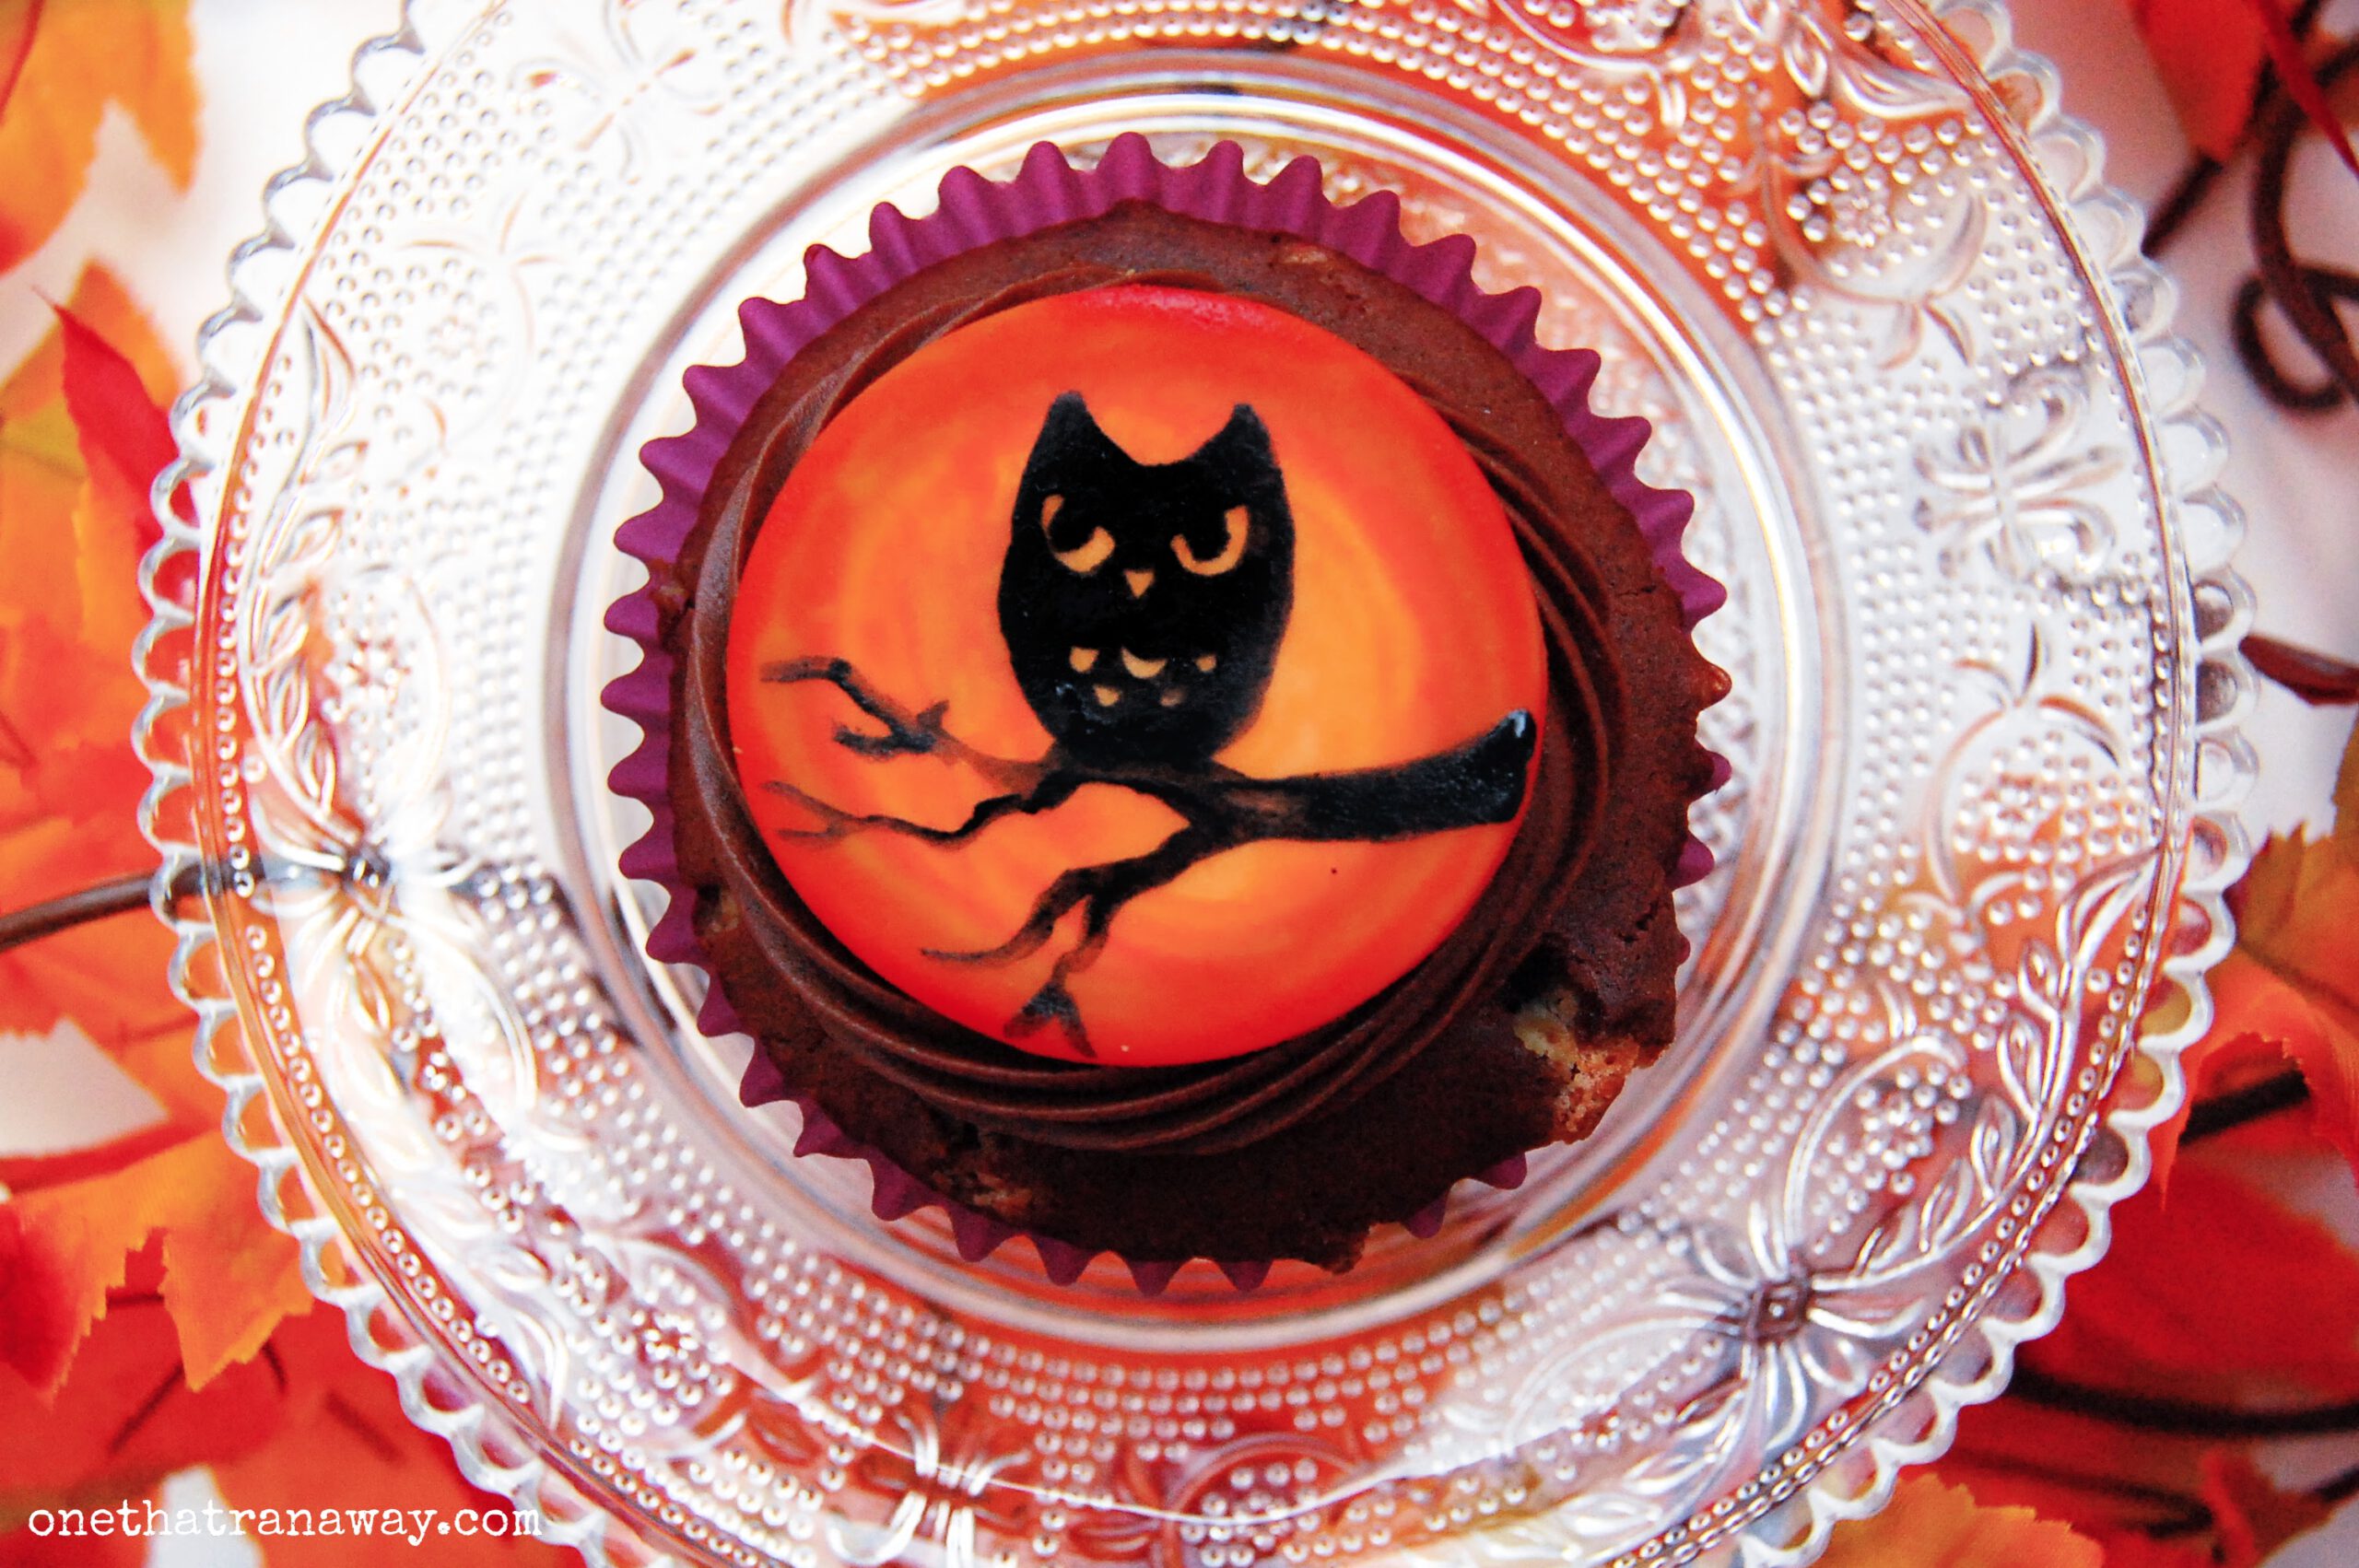 chocolate cupcake with an orange fondant topper showing the silhouette of an owl
